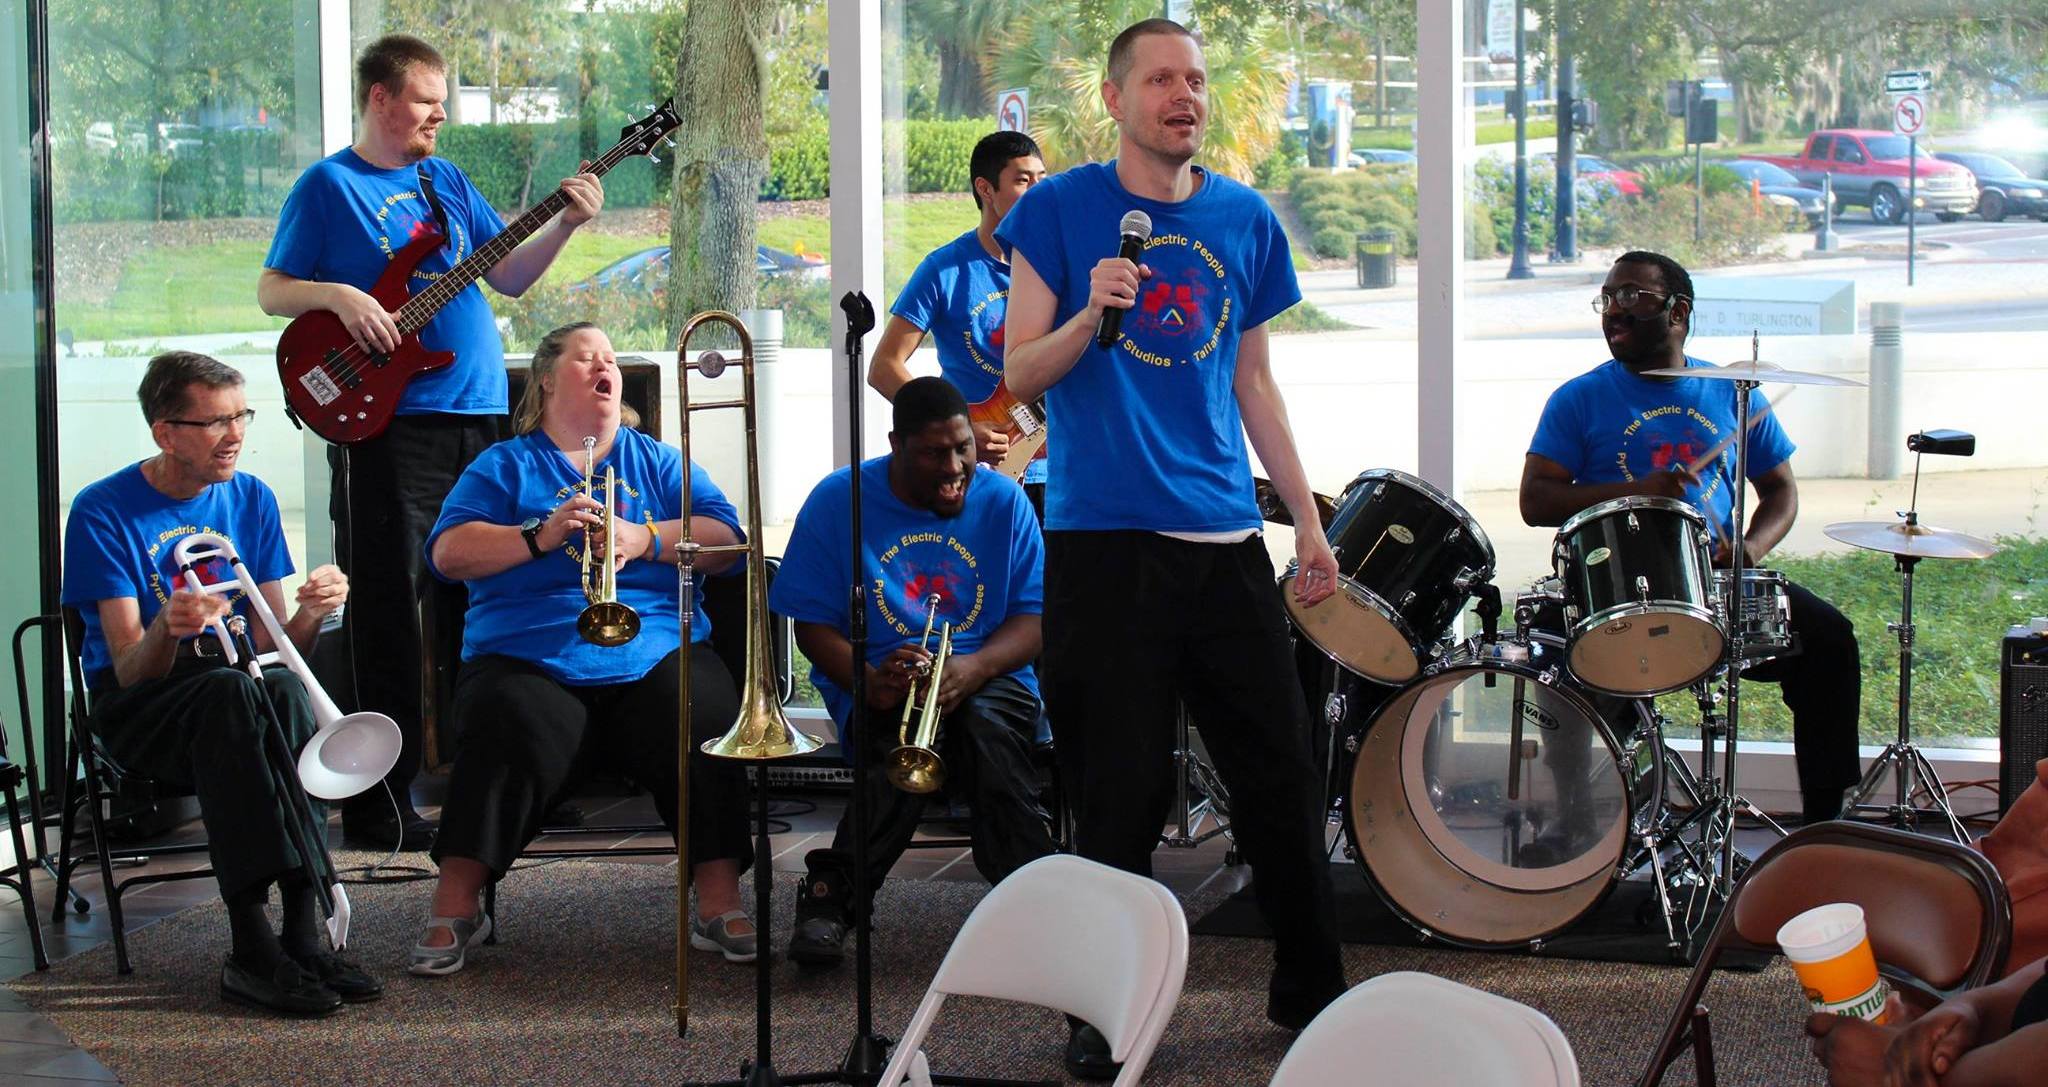 Band playing at the state office in Tallahassee